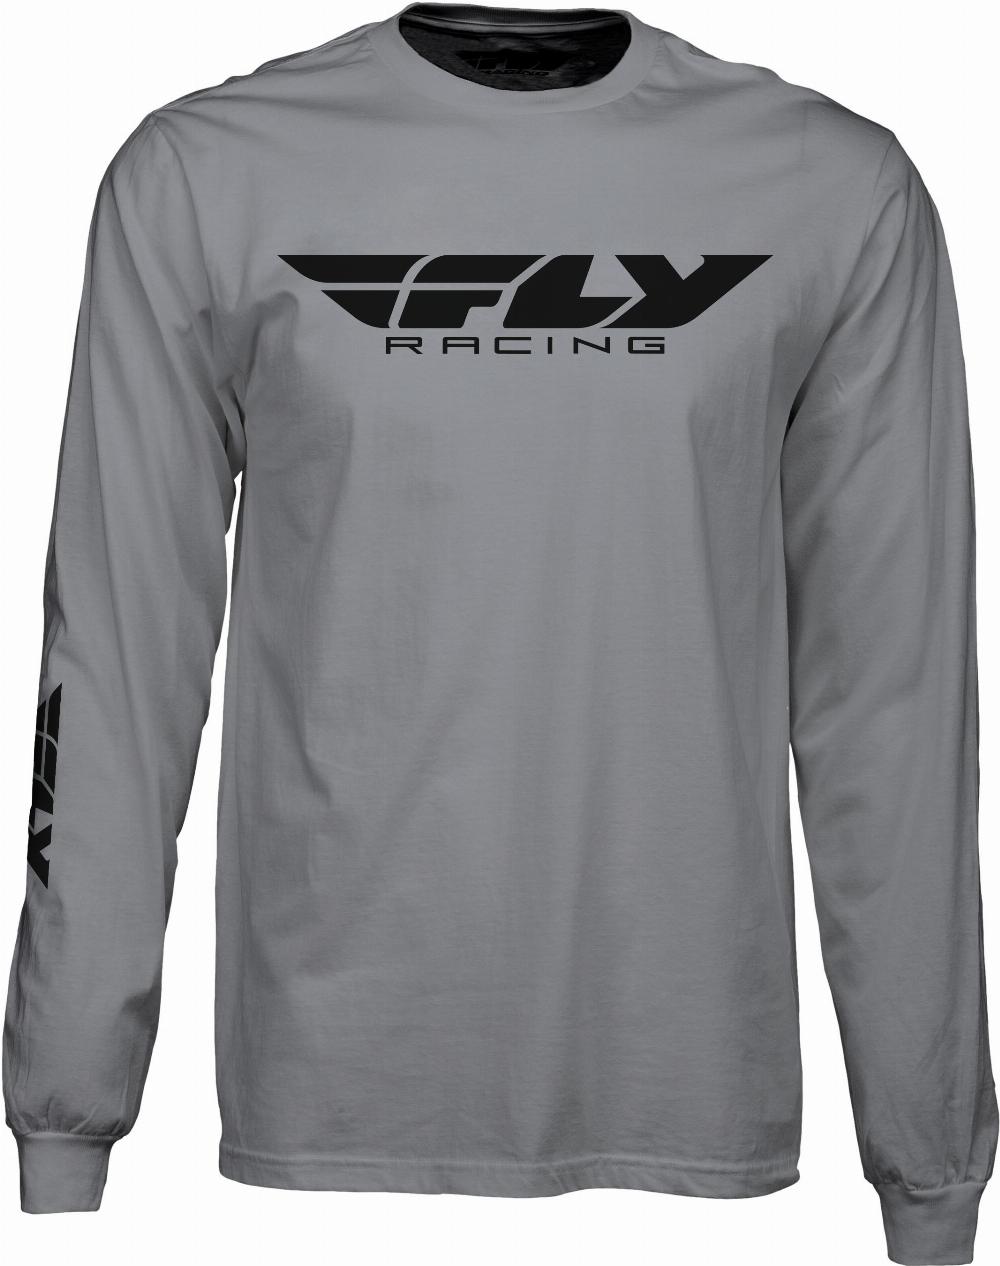 FLY CORPORATE L/S TEE GREY SM#mpn_352-4146S